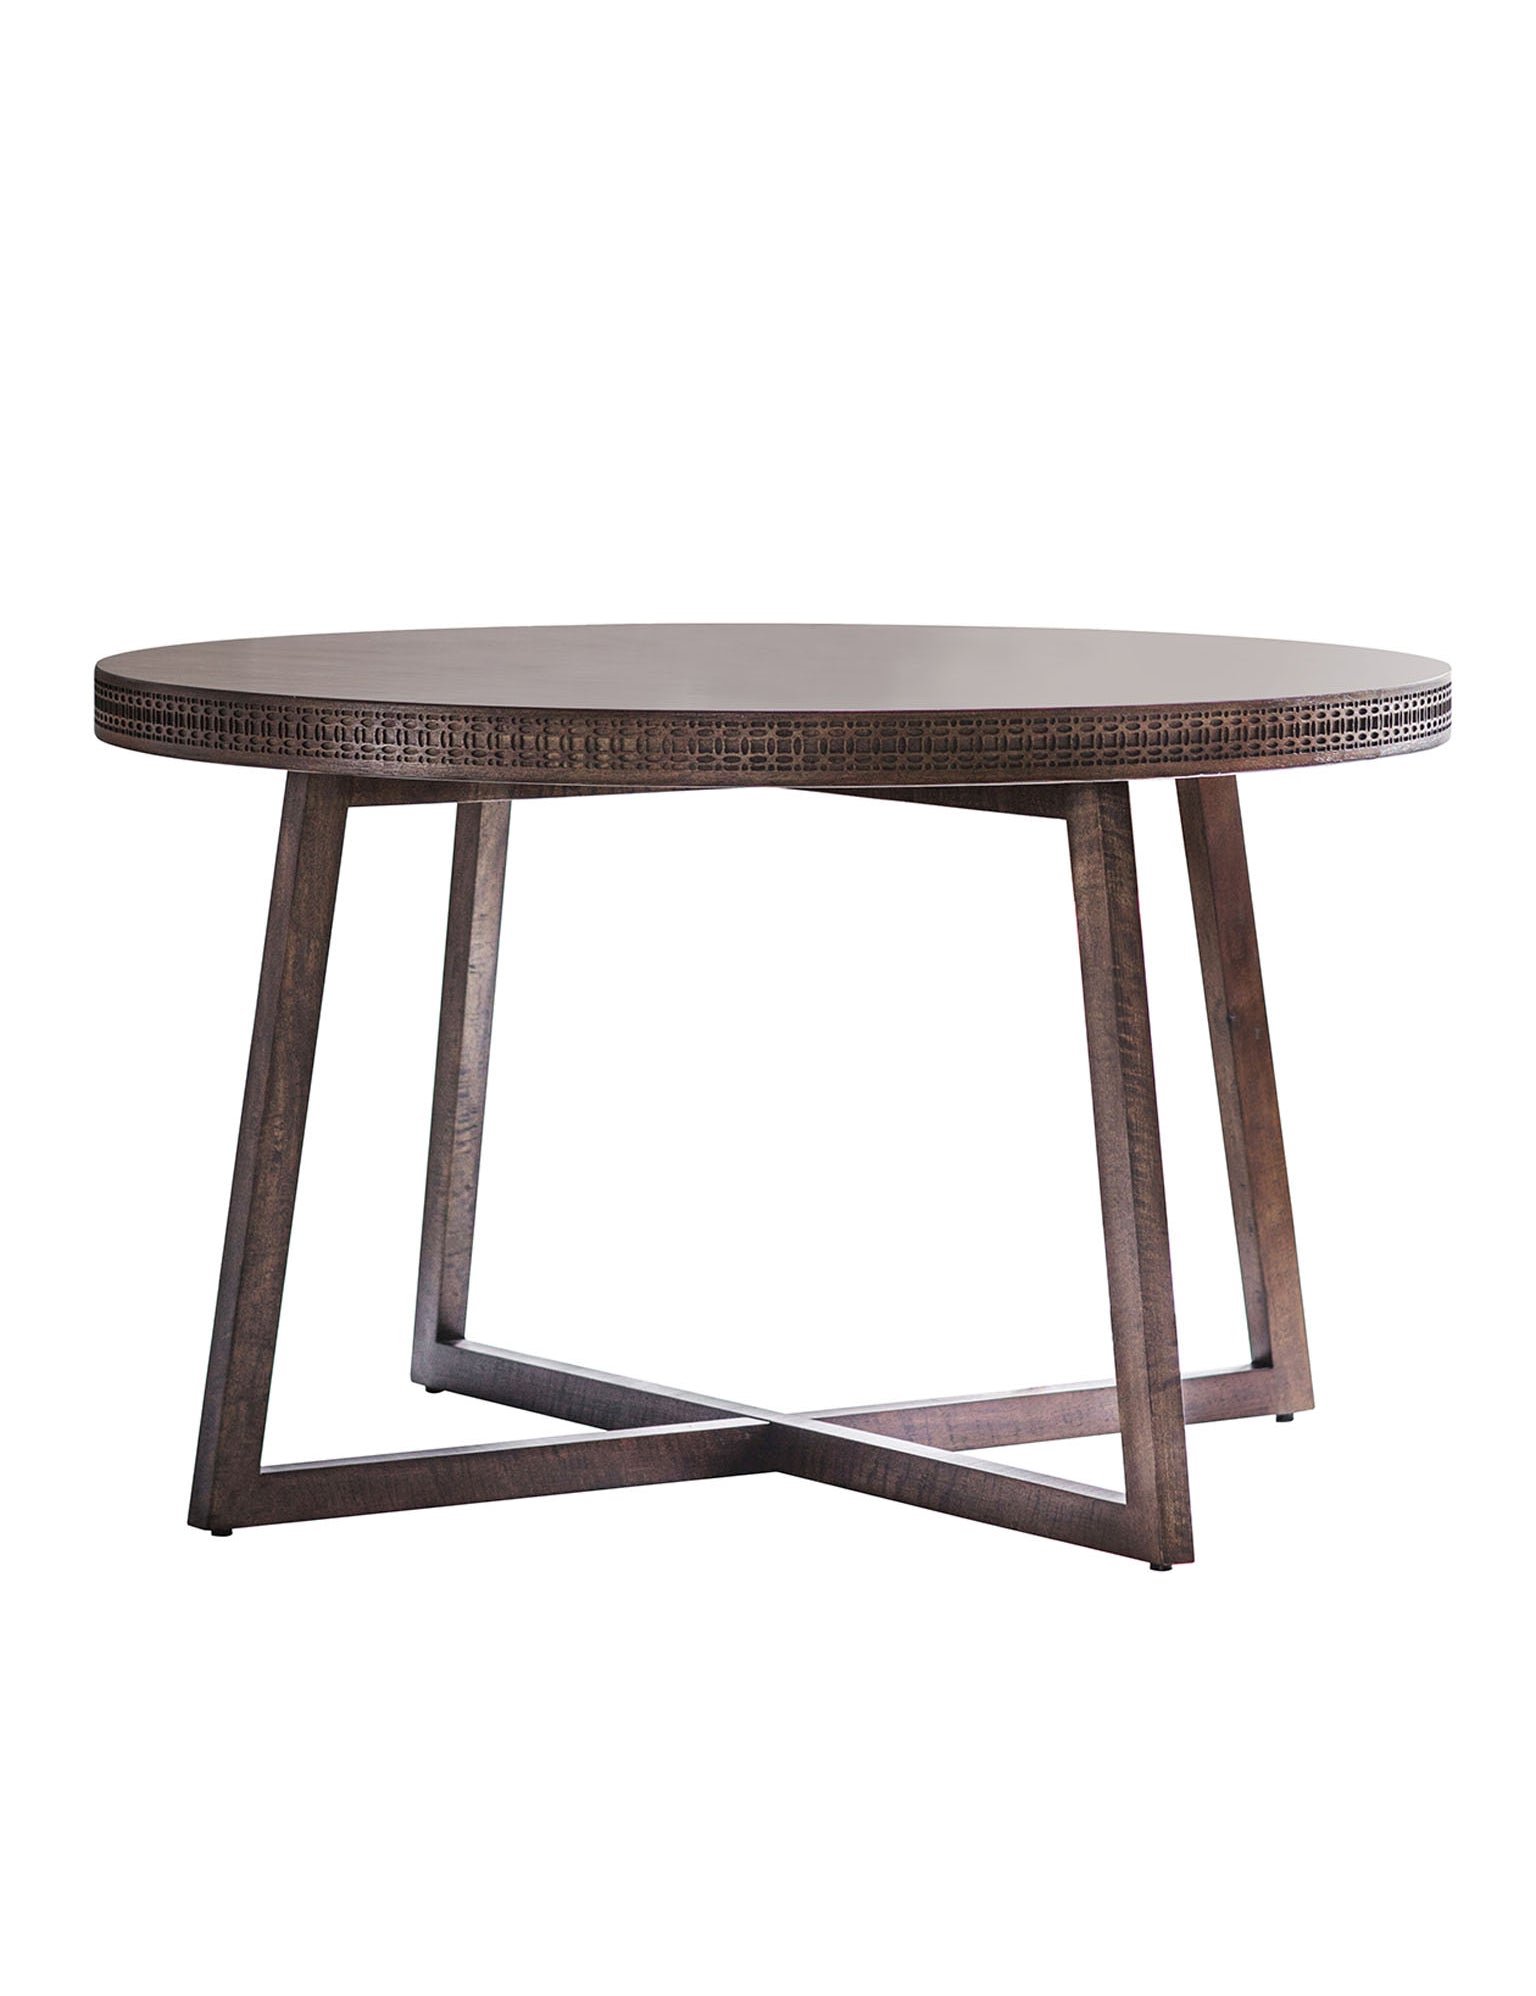 Agra Round Dining Table in Teak, Mahogany, Mindy Ash and Mango